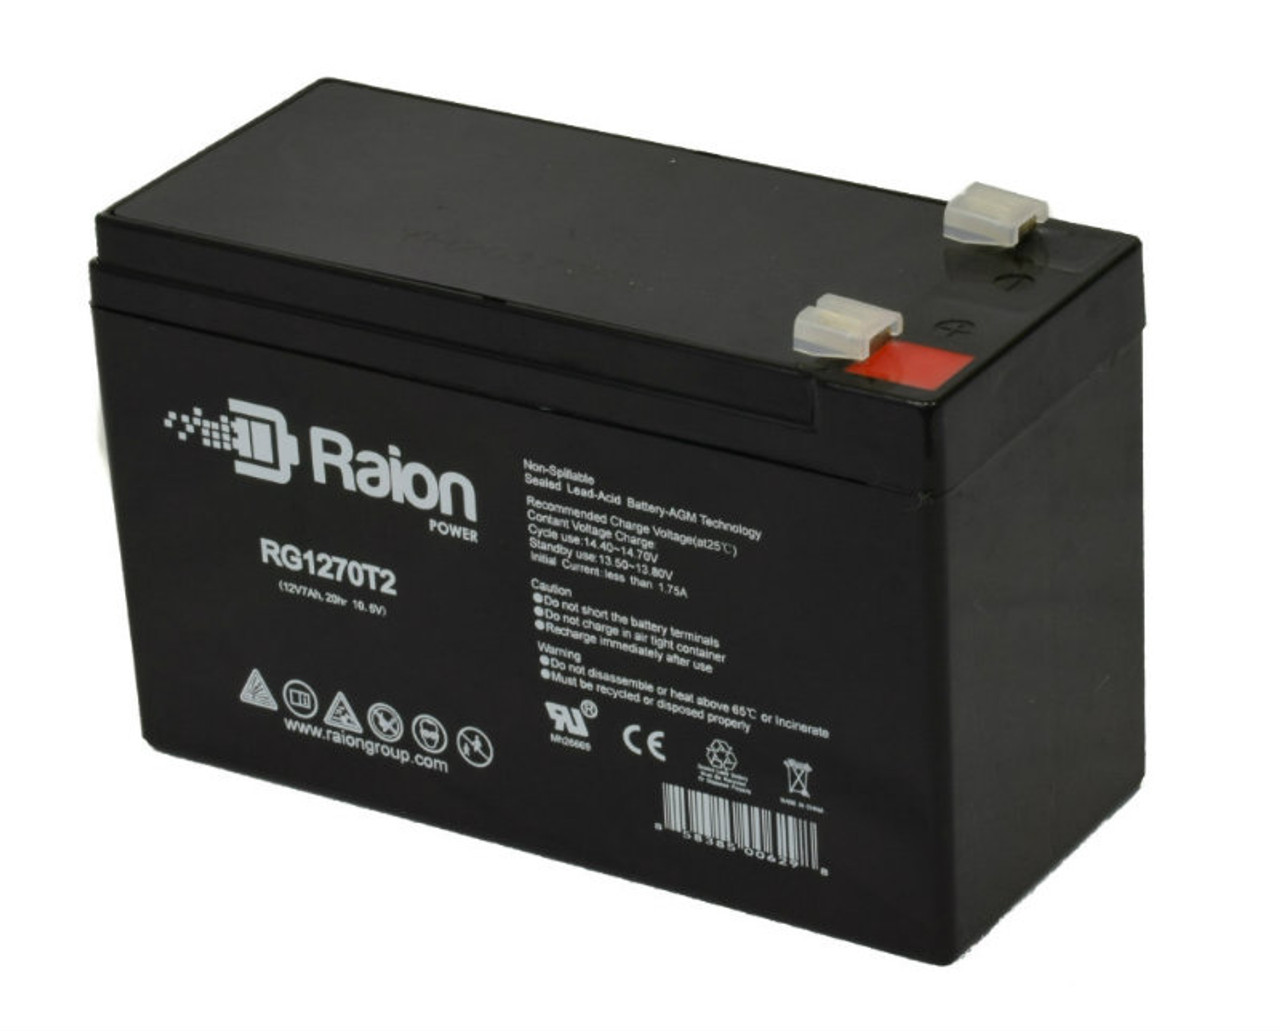 Raion Power RG1270T1 12V 7Ah Non-Spillable Replacement Battery for Eagle Picher CF-12V7.2